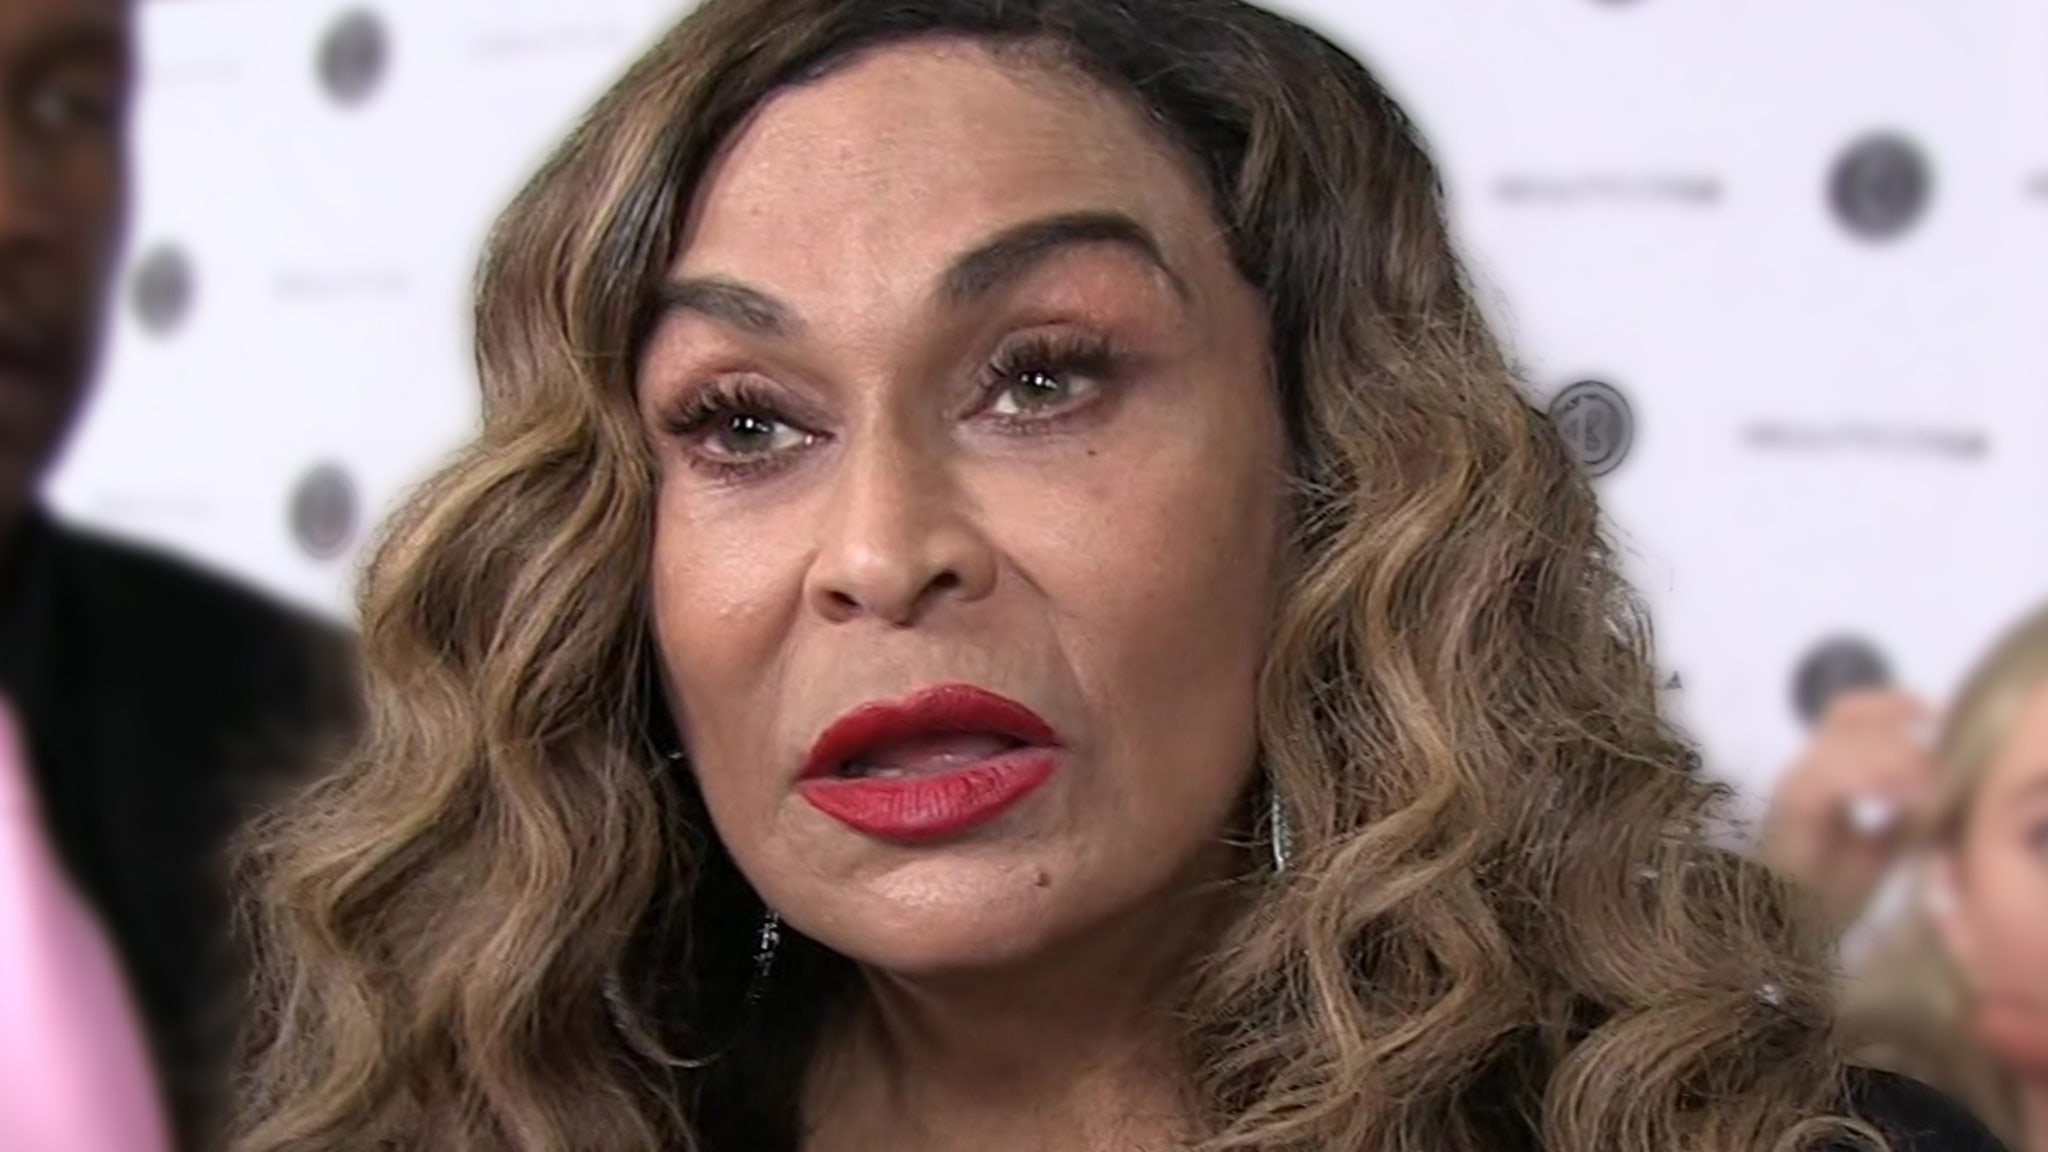 Tina Knowles' home hit by burglars, $1 million in cash and stolen jewelry